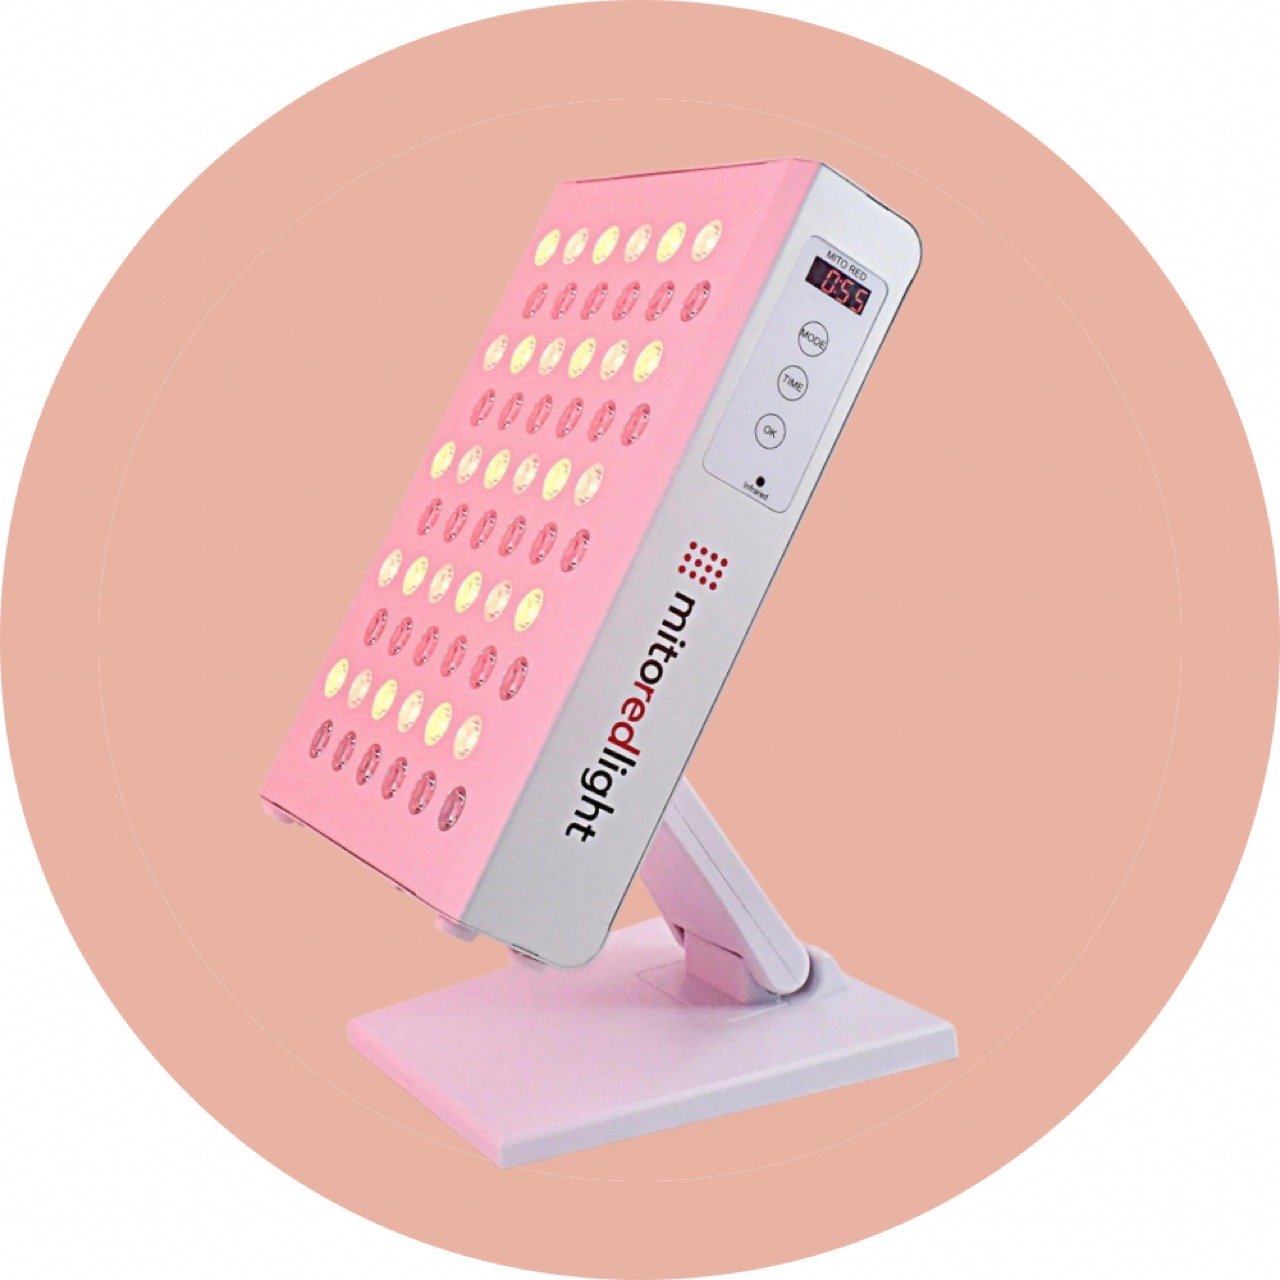 5 Factors to Consider When Choosing a Red Light Therapy Device